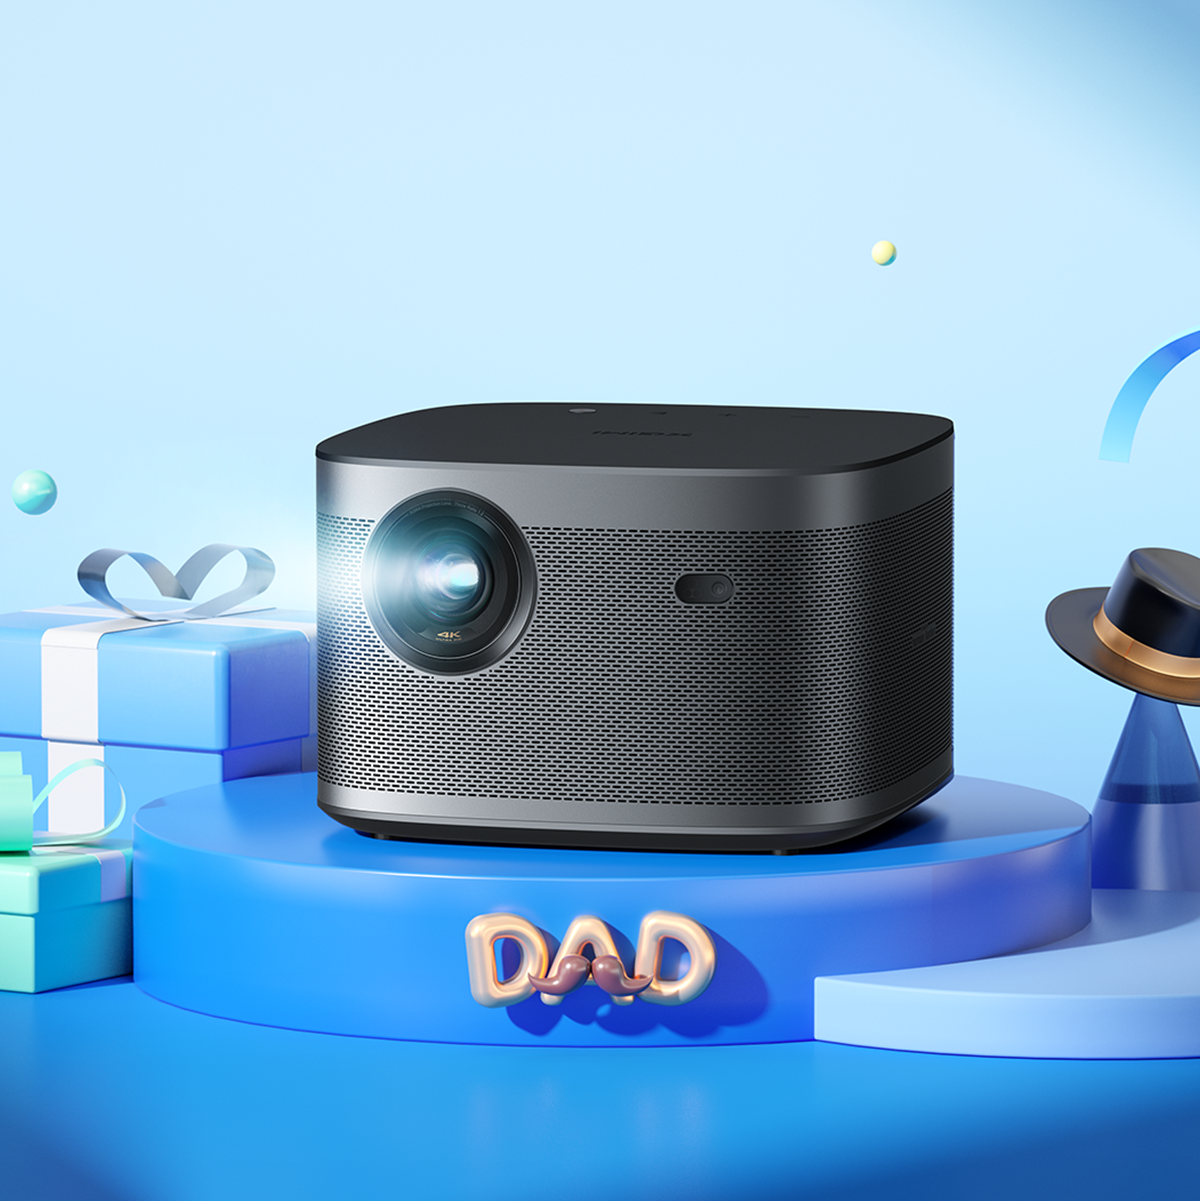 Celebrating Father's Day With
The Best Presents For Dad